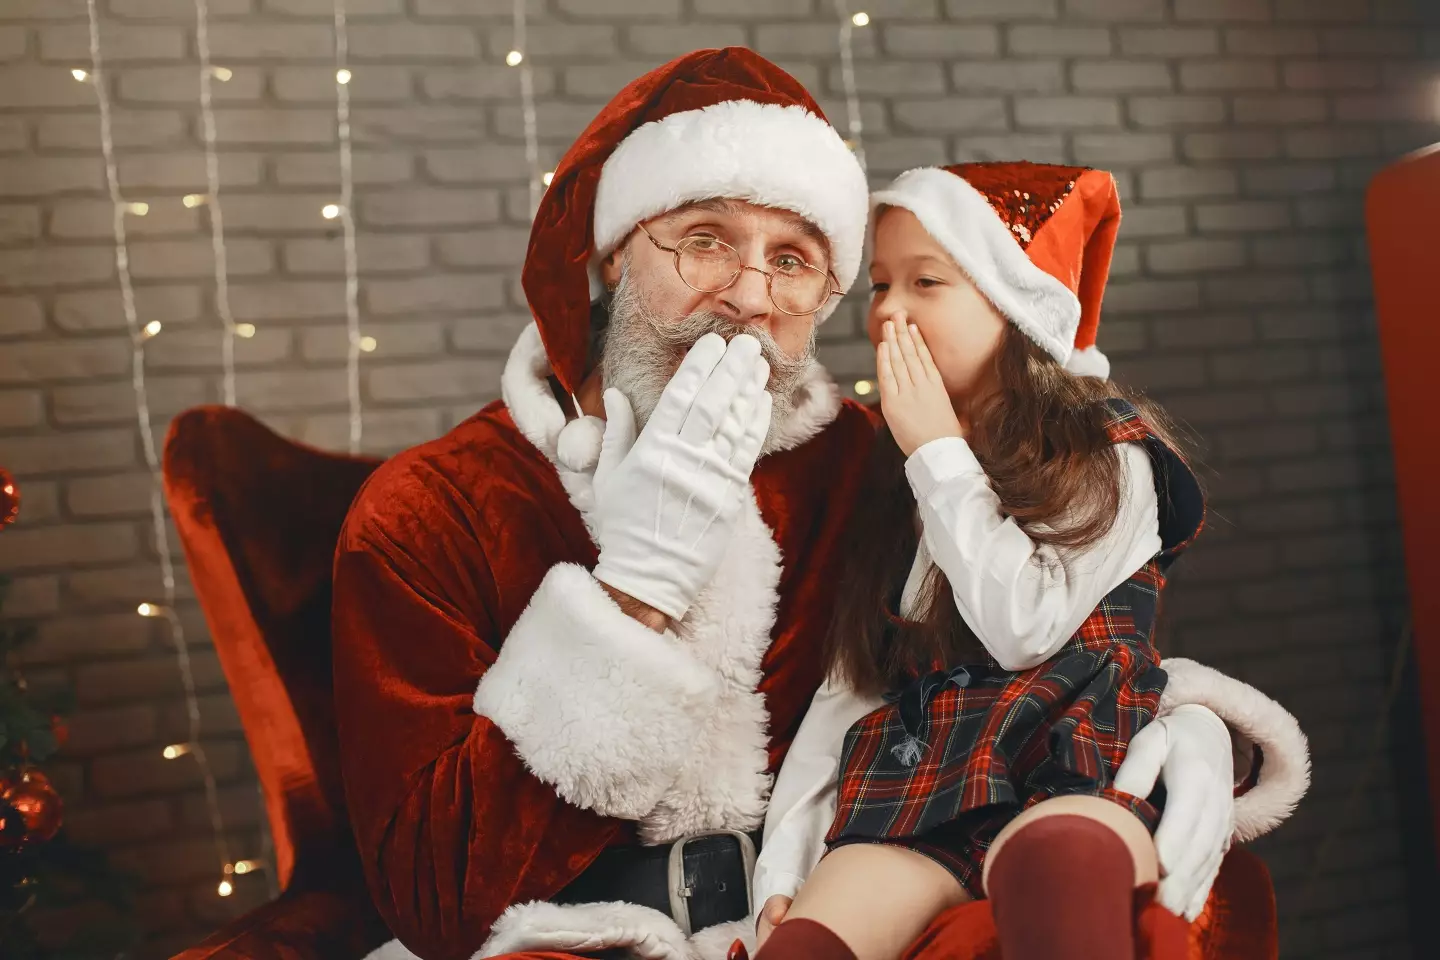 Some children may have difficult questions for Santa.